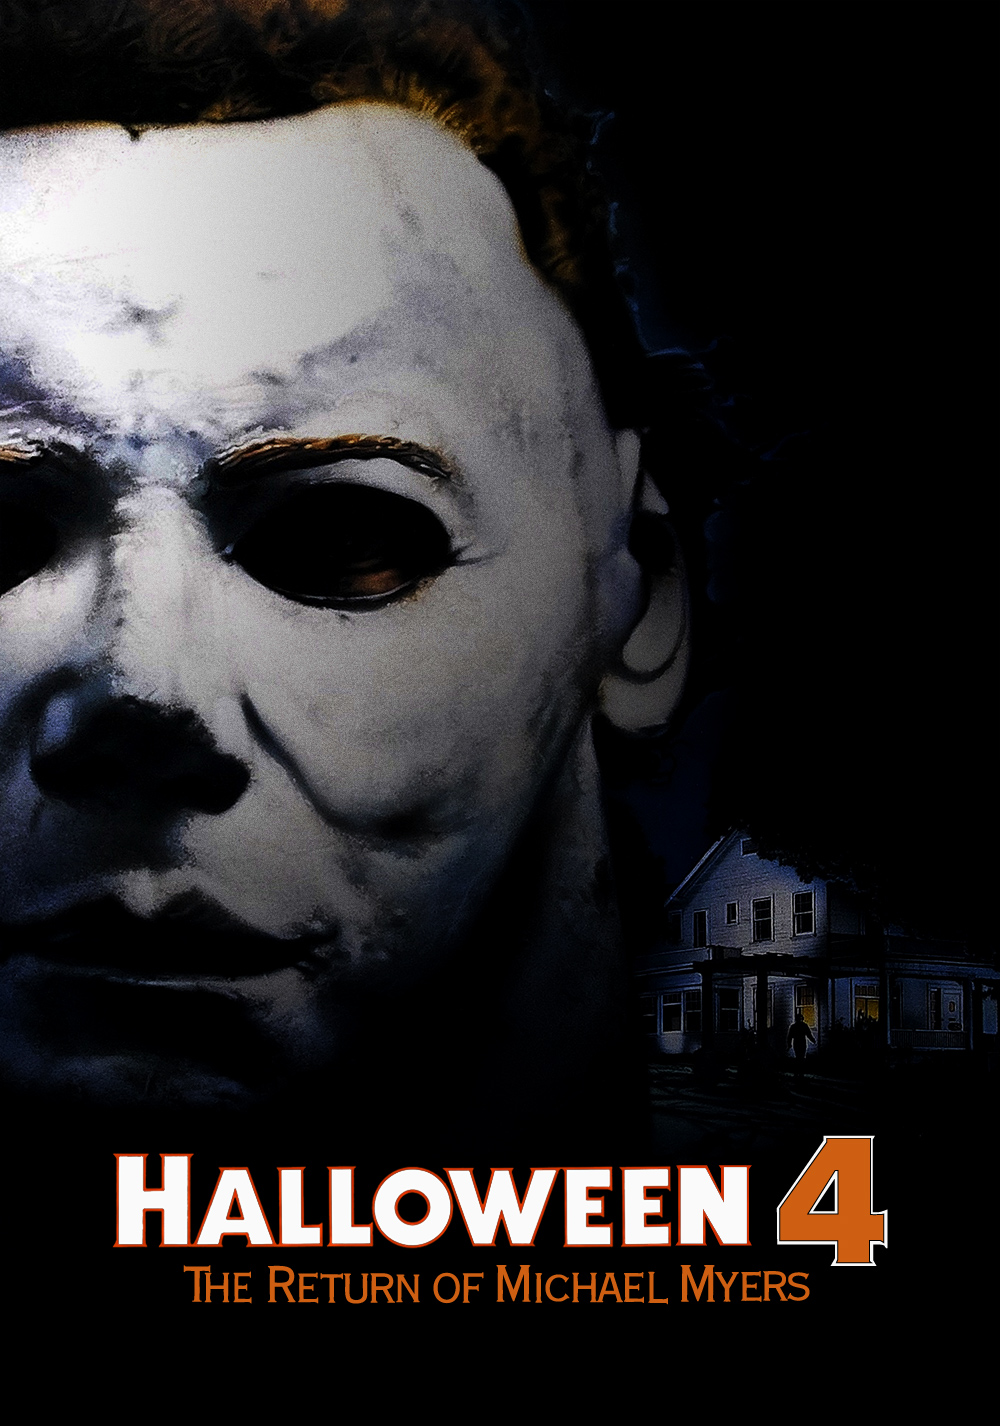 Halloween 4: The Return of Michael Myers Picture